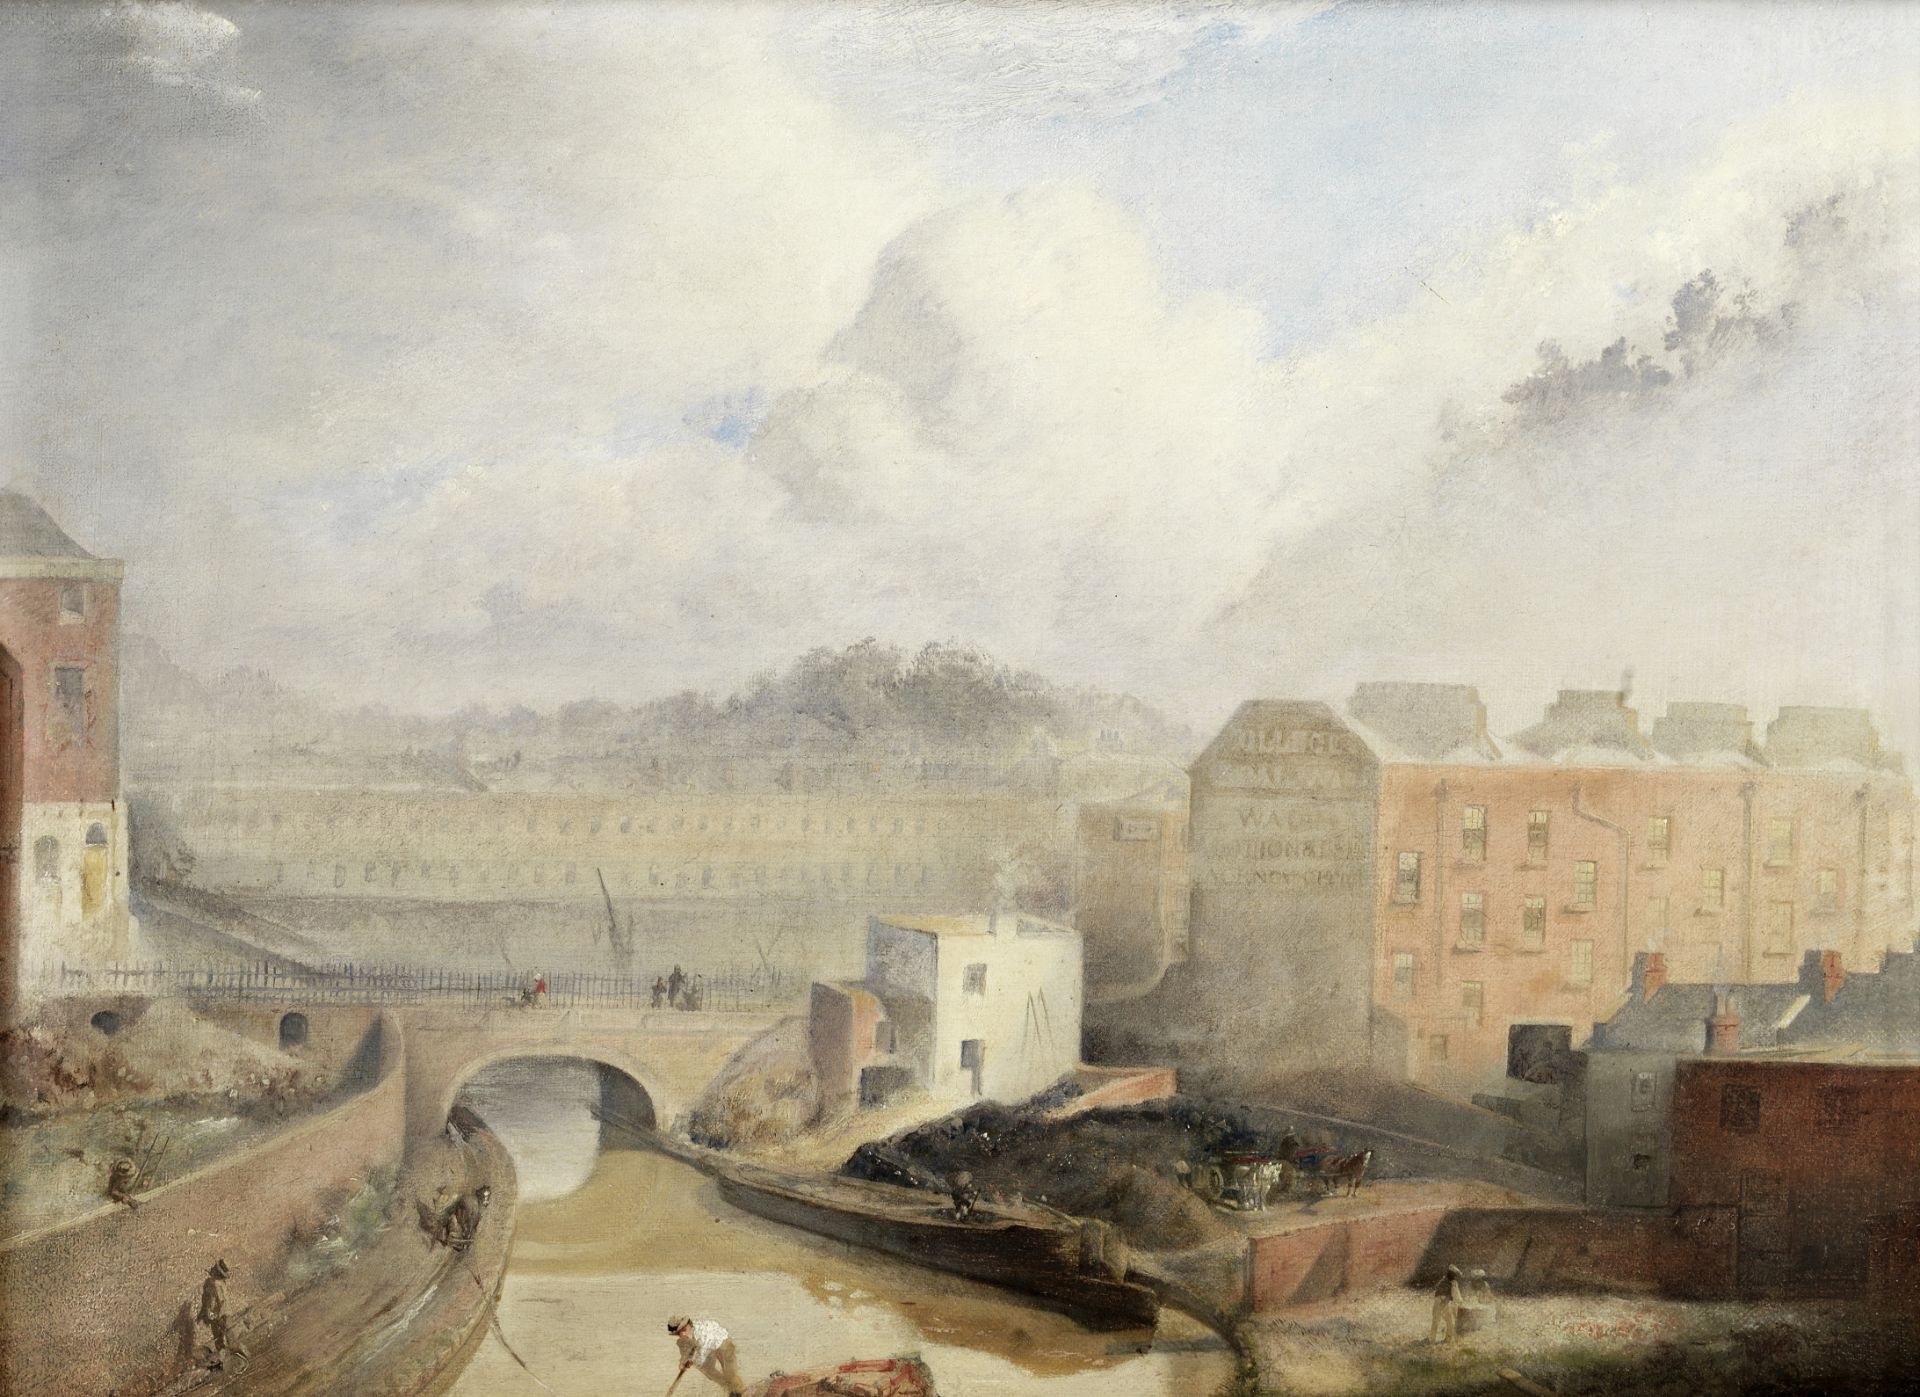 L. Evans, 19th Century 'View on Regent's Canal'